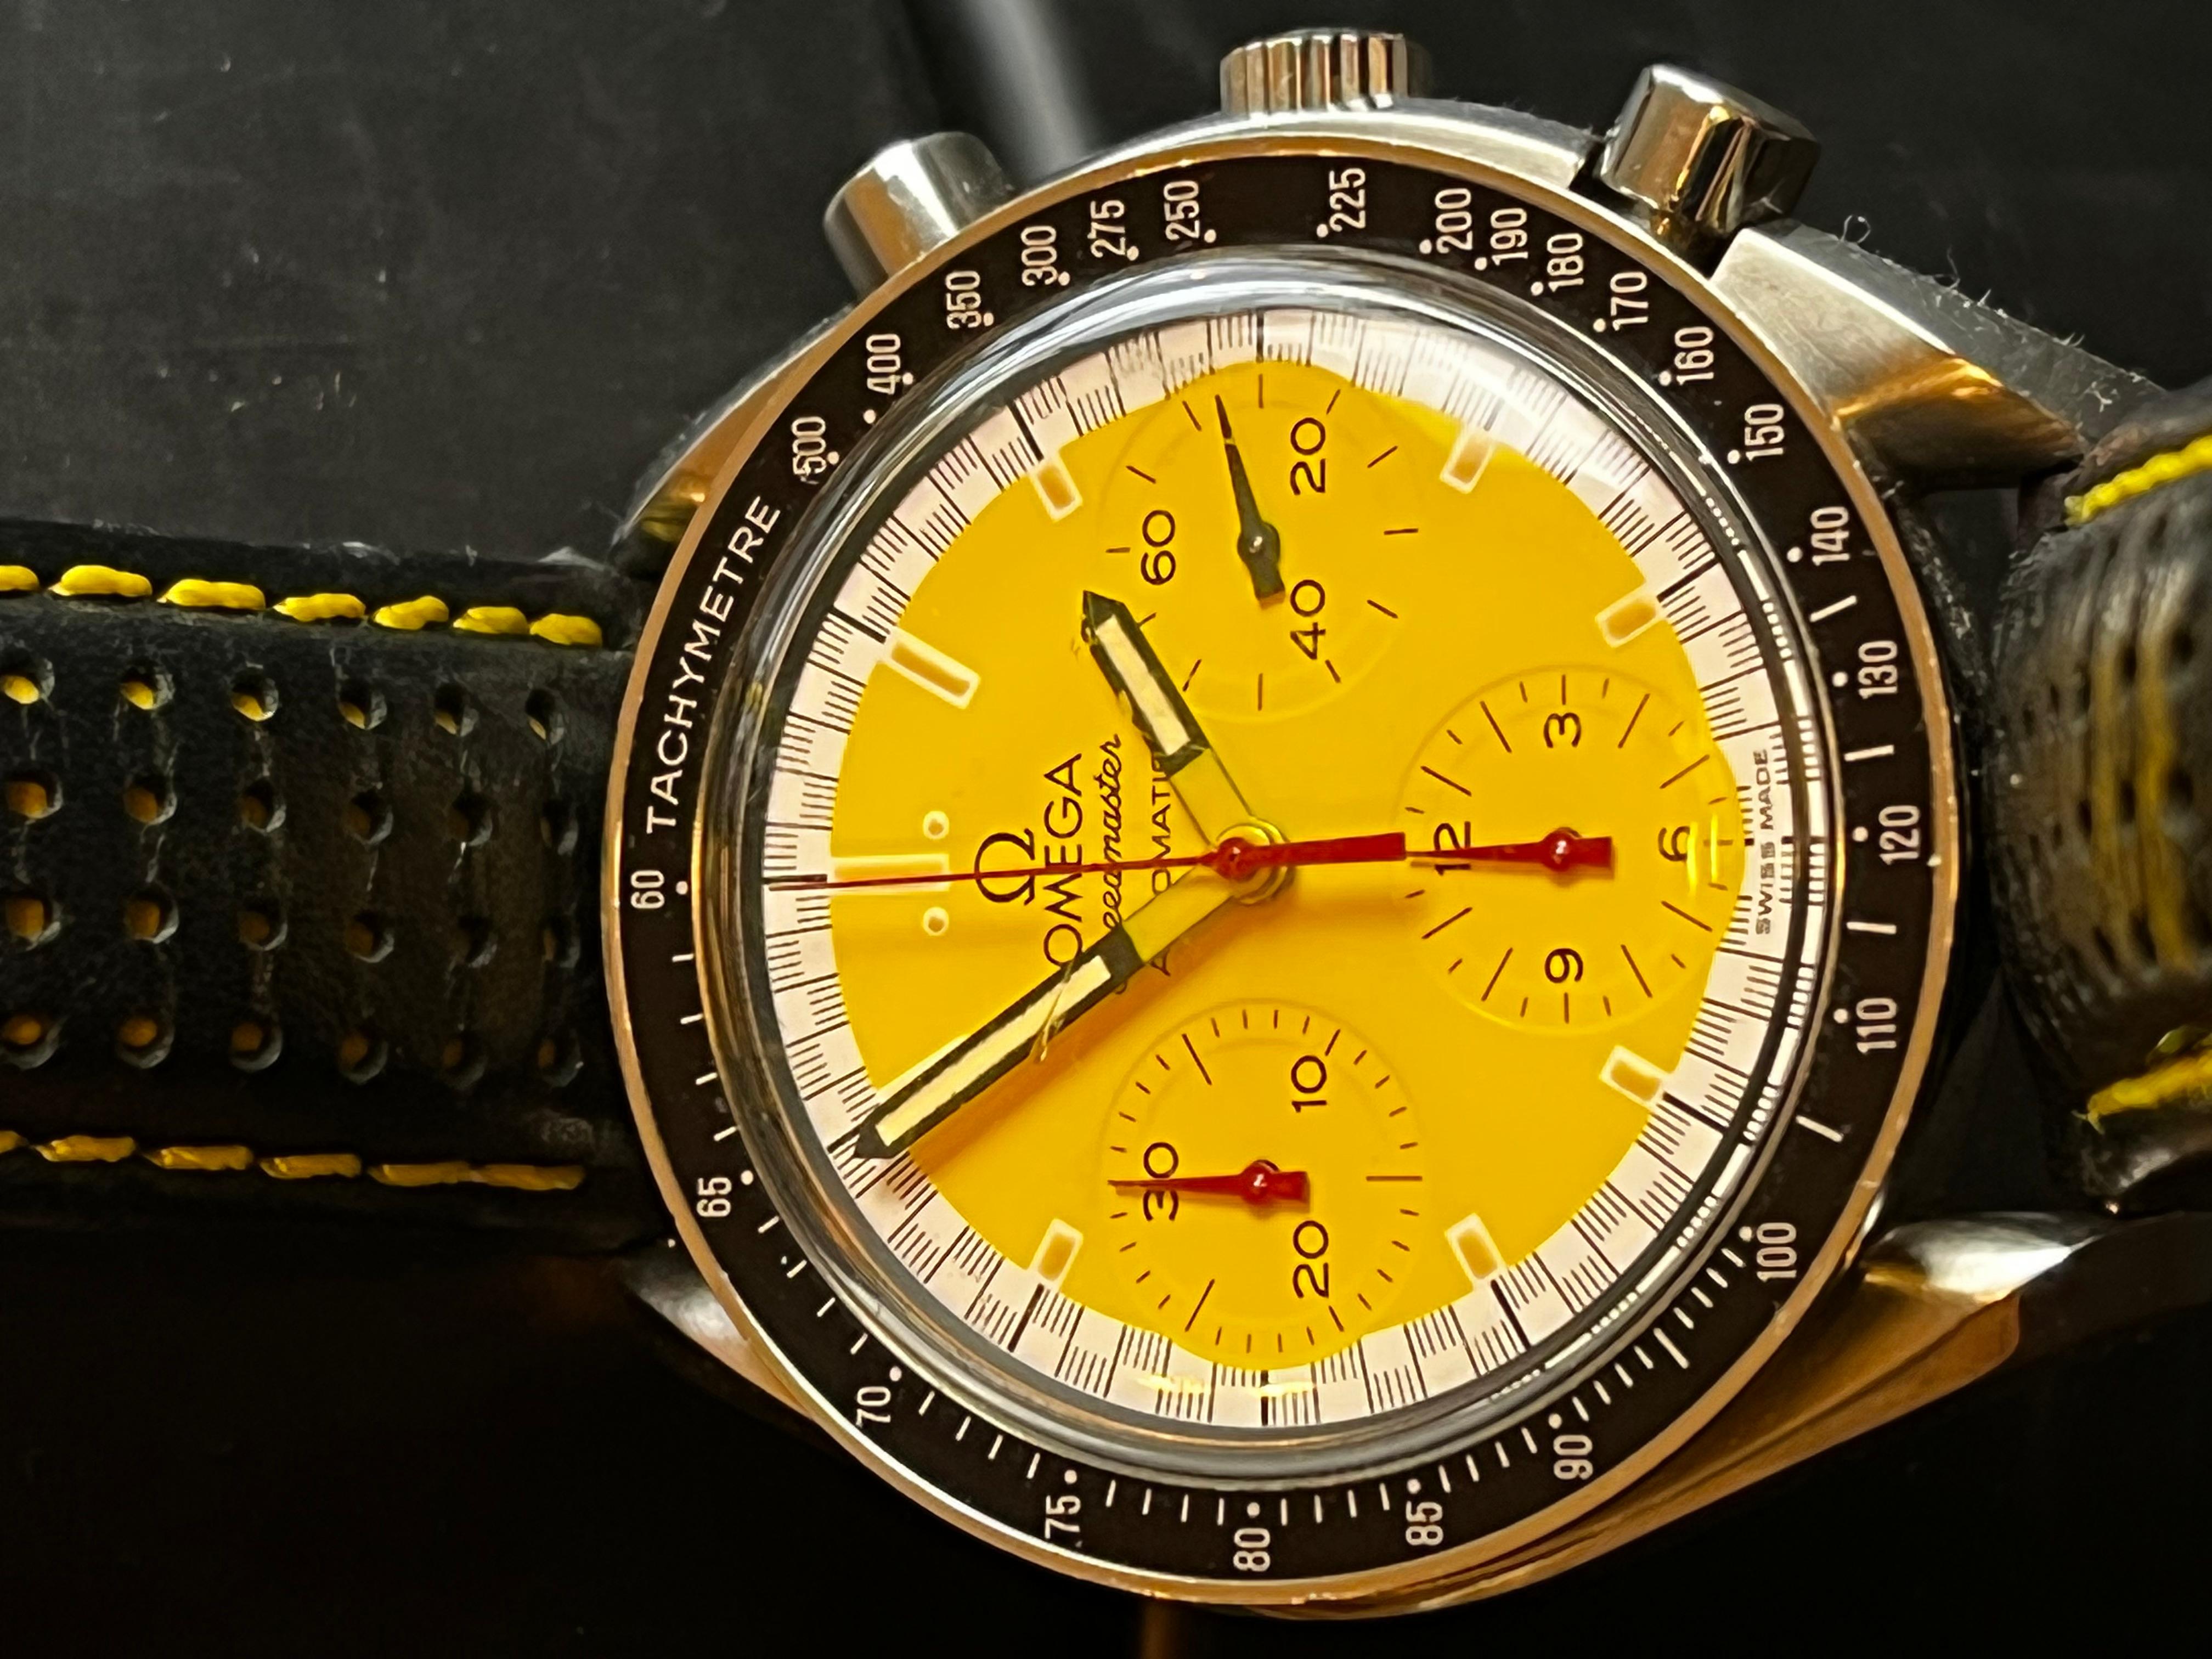 An Omega Speedmaster Chronograph with Tachymeter
Circa 1998
Michael Schumacher edition
With its rare and original ‘Racing Tyre’ watch box
Case width 39mm
With original instruction book
In super vintage condition, very well looked after, running well